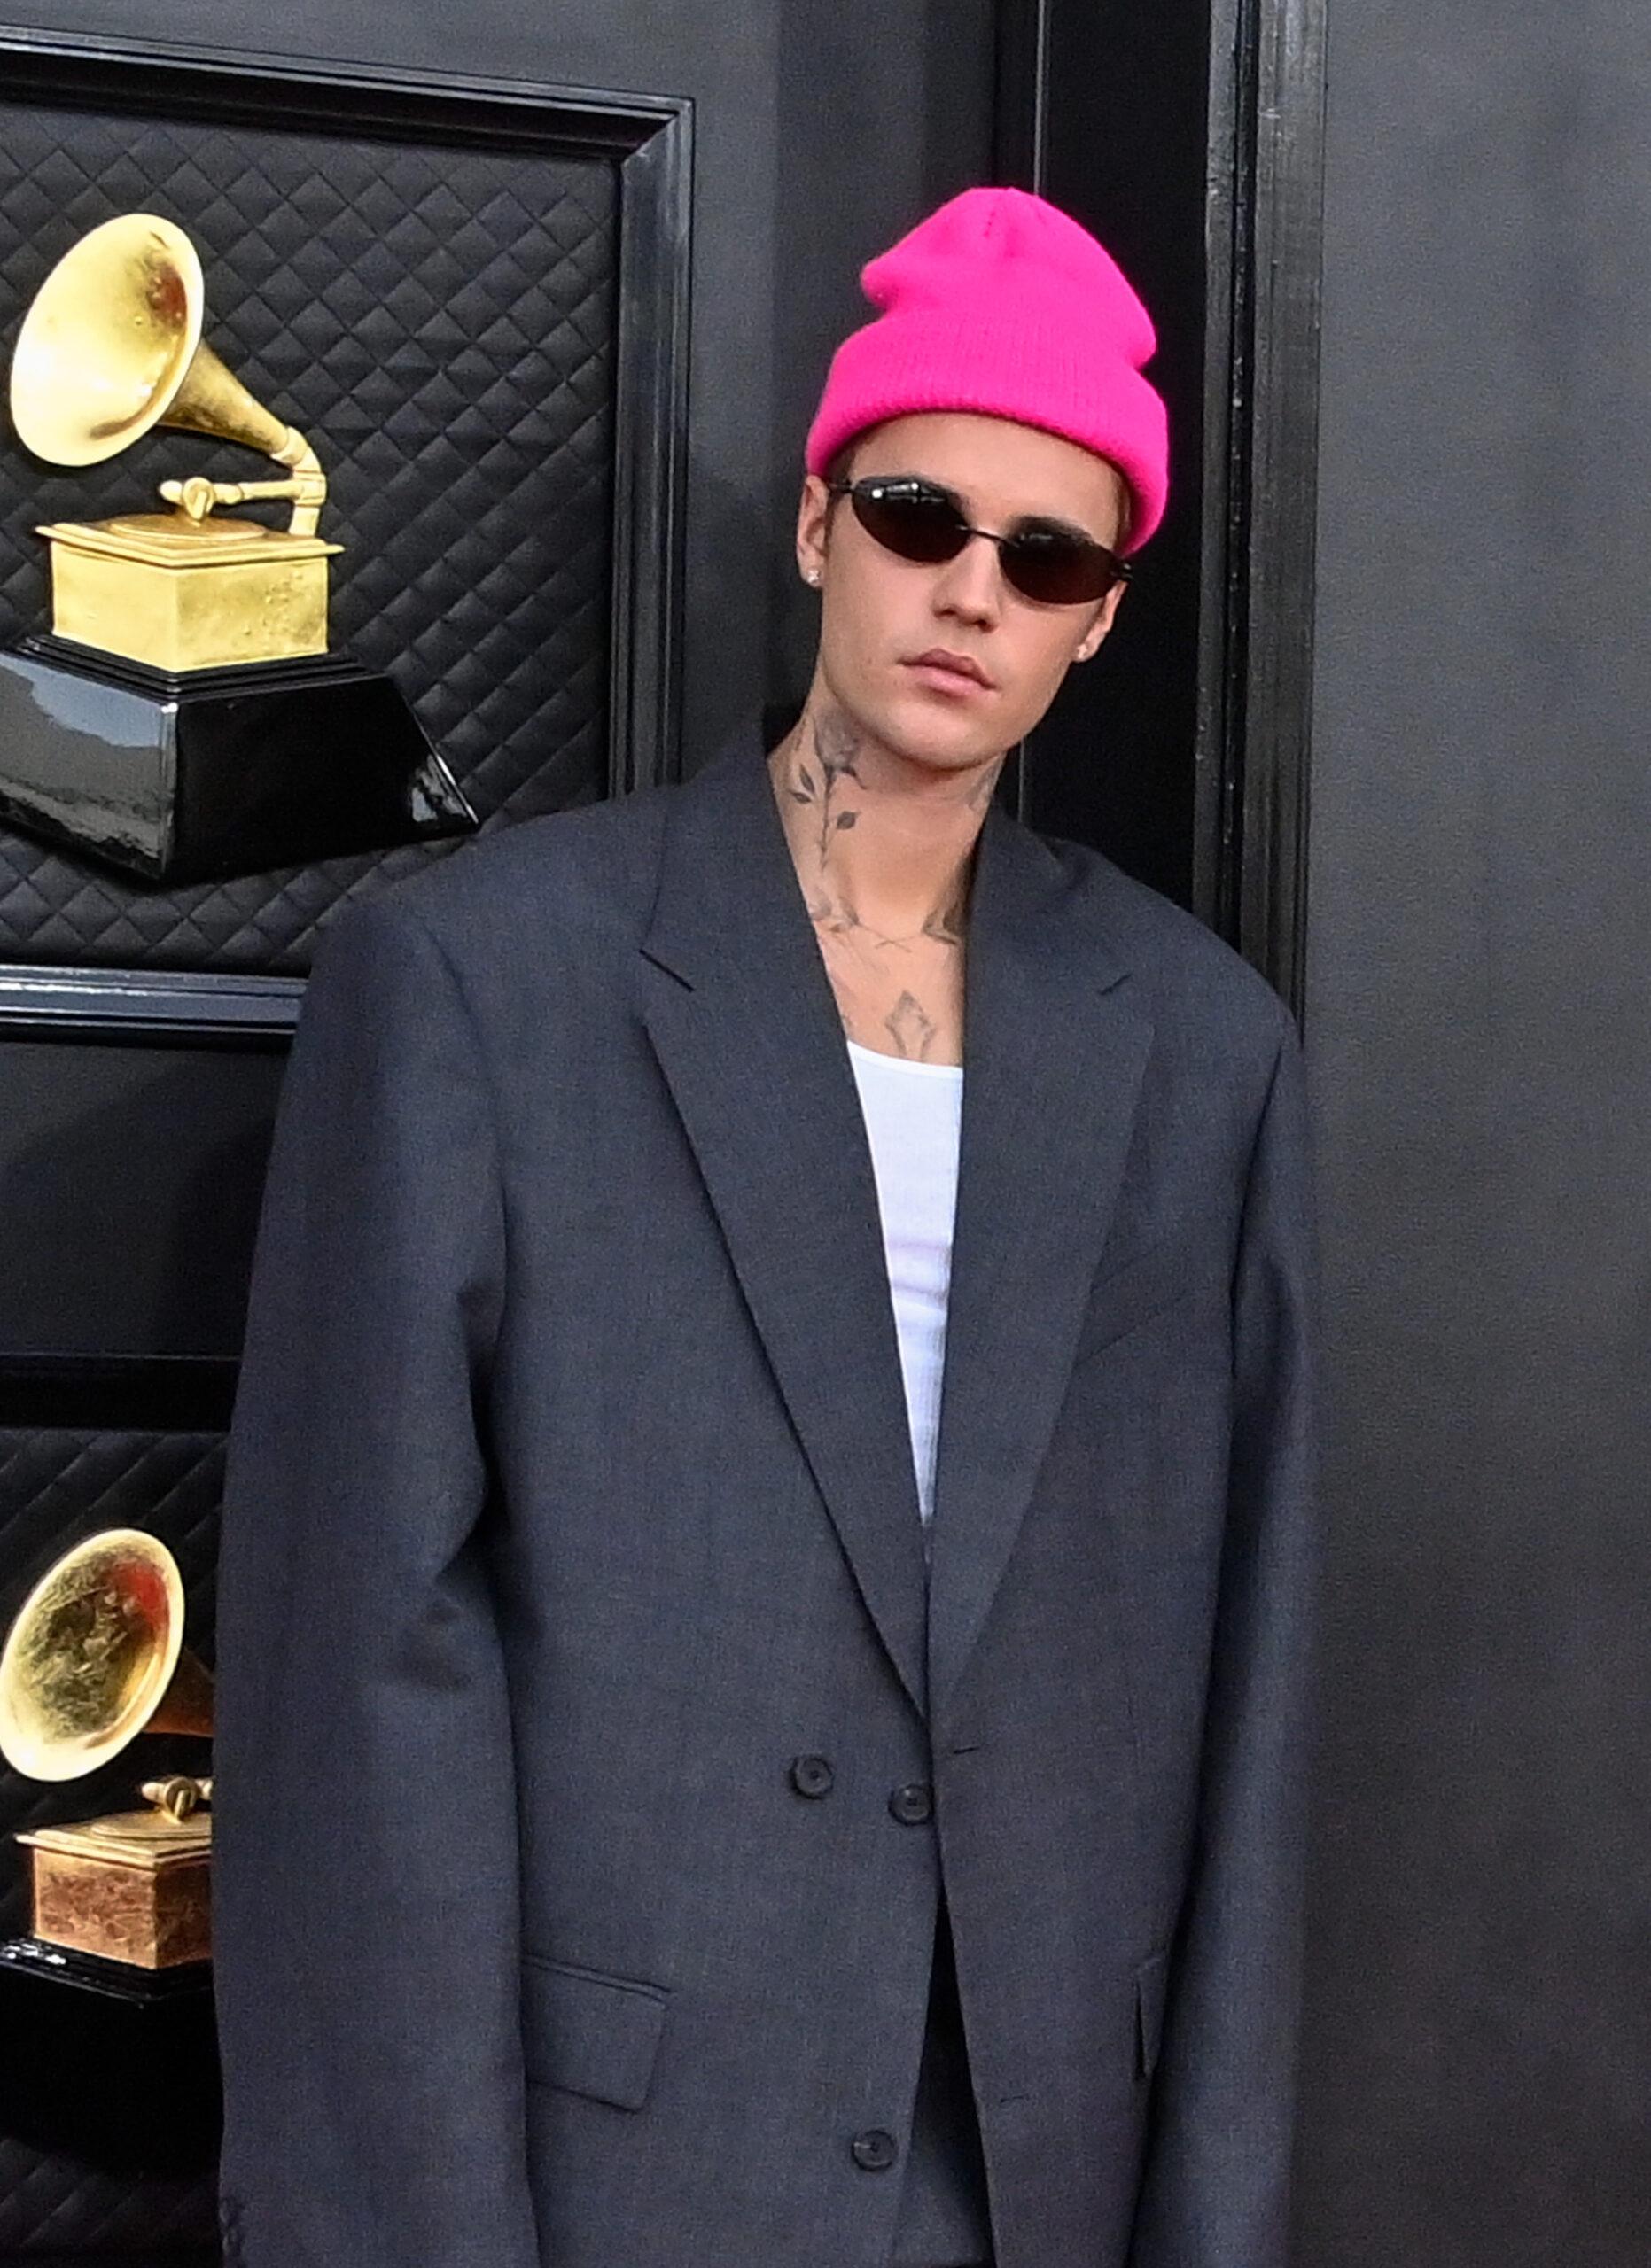 Justin Bieber at the 64th Grammy Awards in Las Vegas